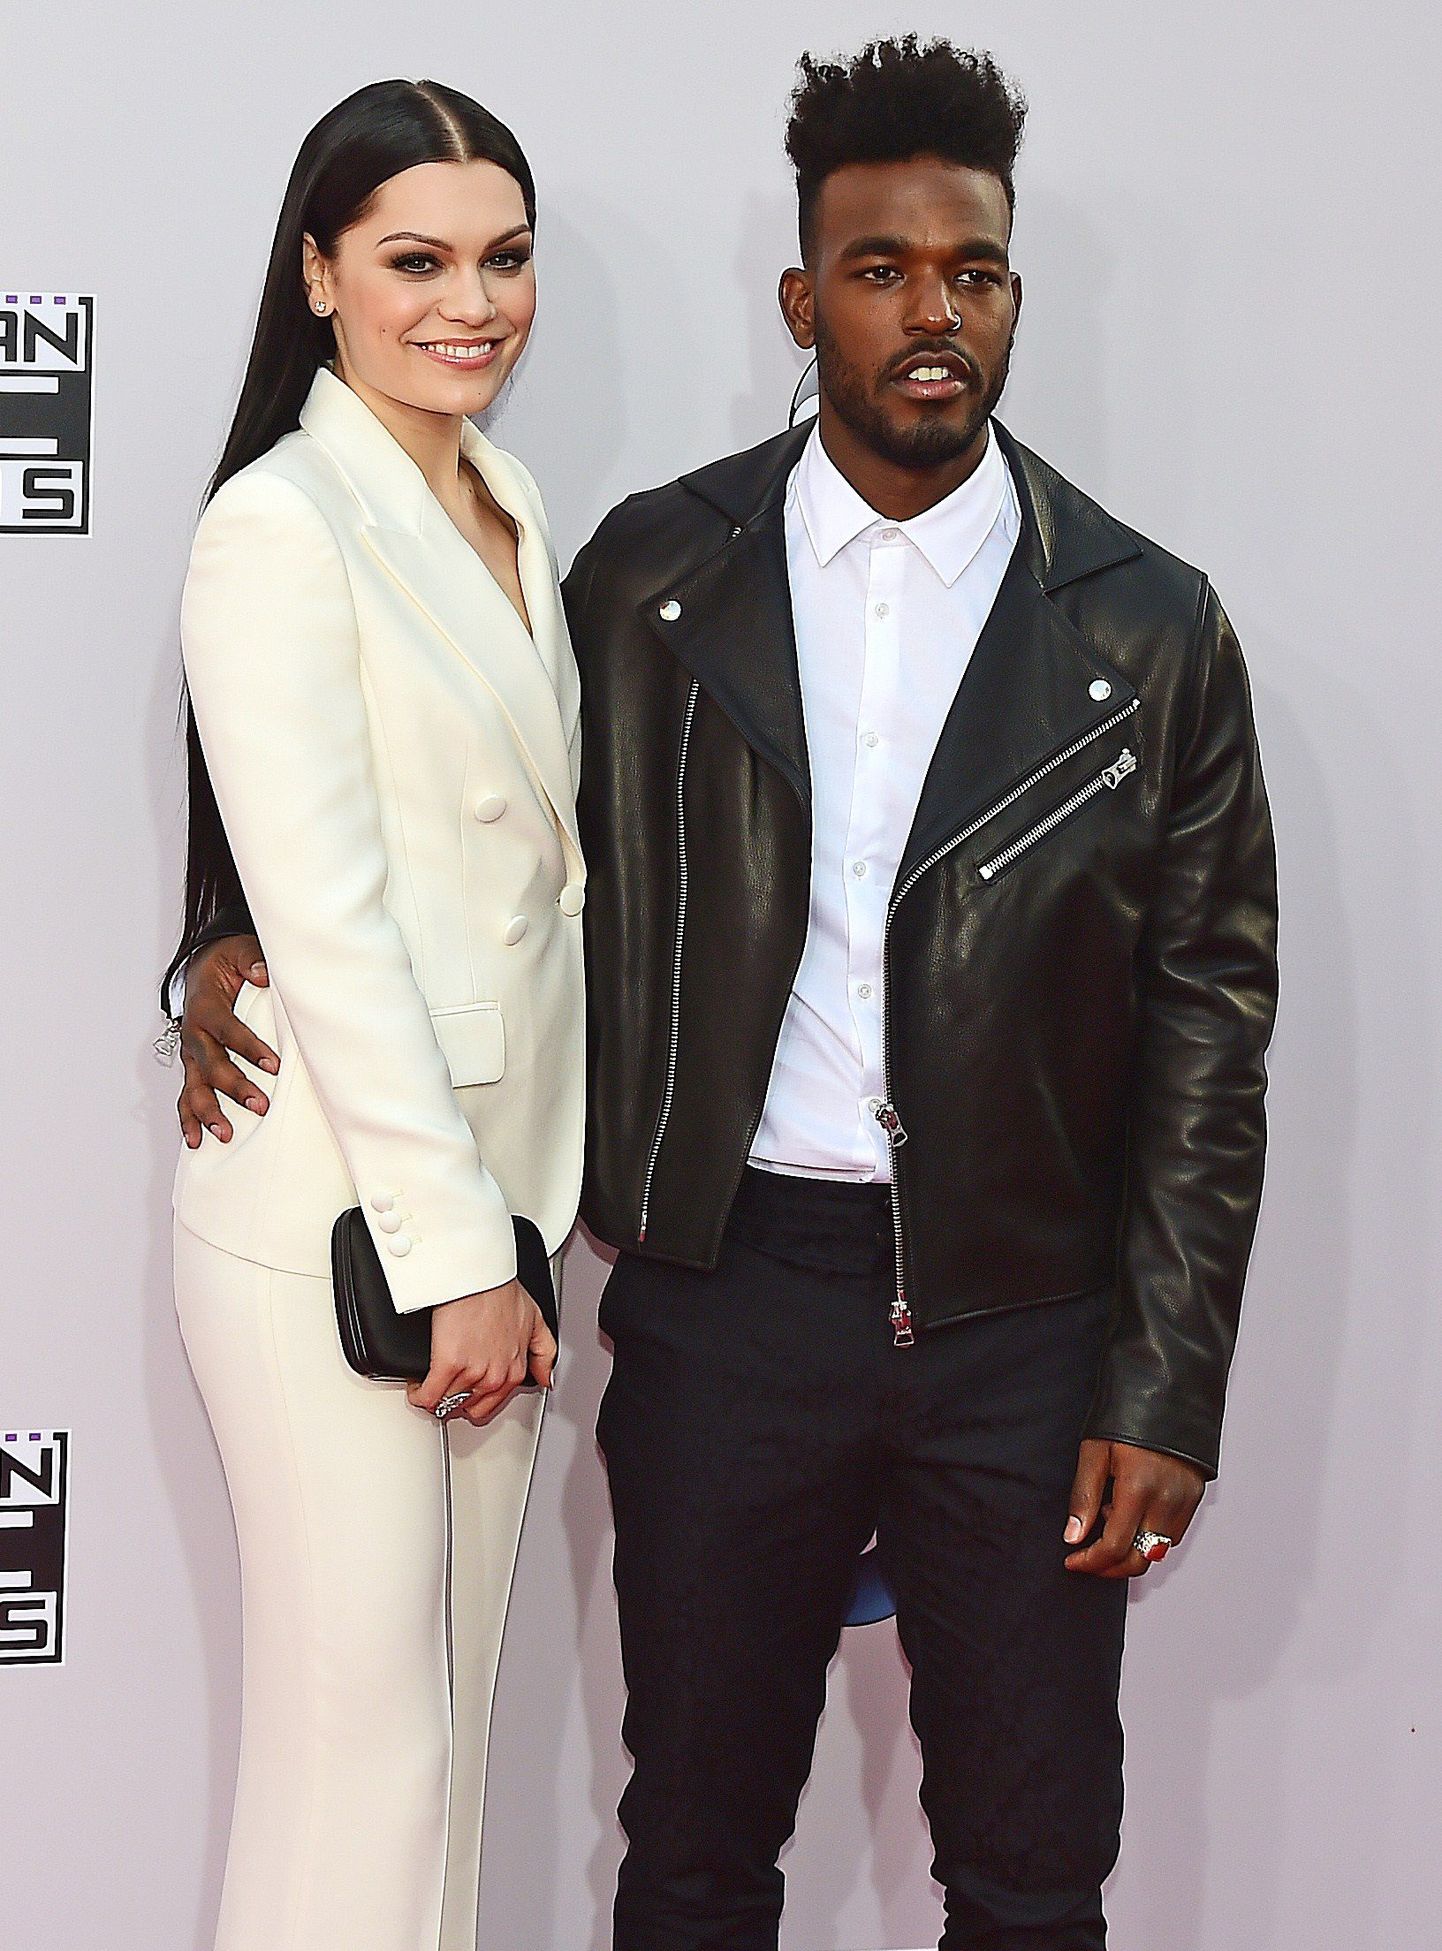 Singers Jessie J (L) and Luke James attends the 2014 American Music Awards at Nokia Theatre L.A. Live in Los Angeles, California,  November 23, 2014. AFP PHOTO/FREDERIC J. BROWN